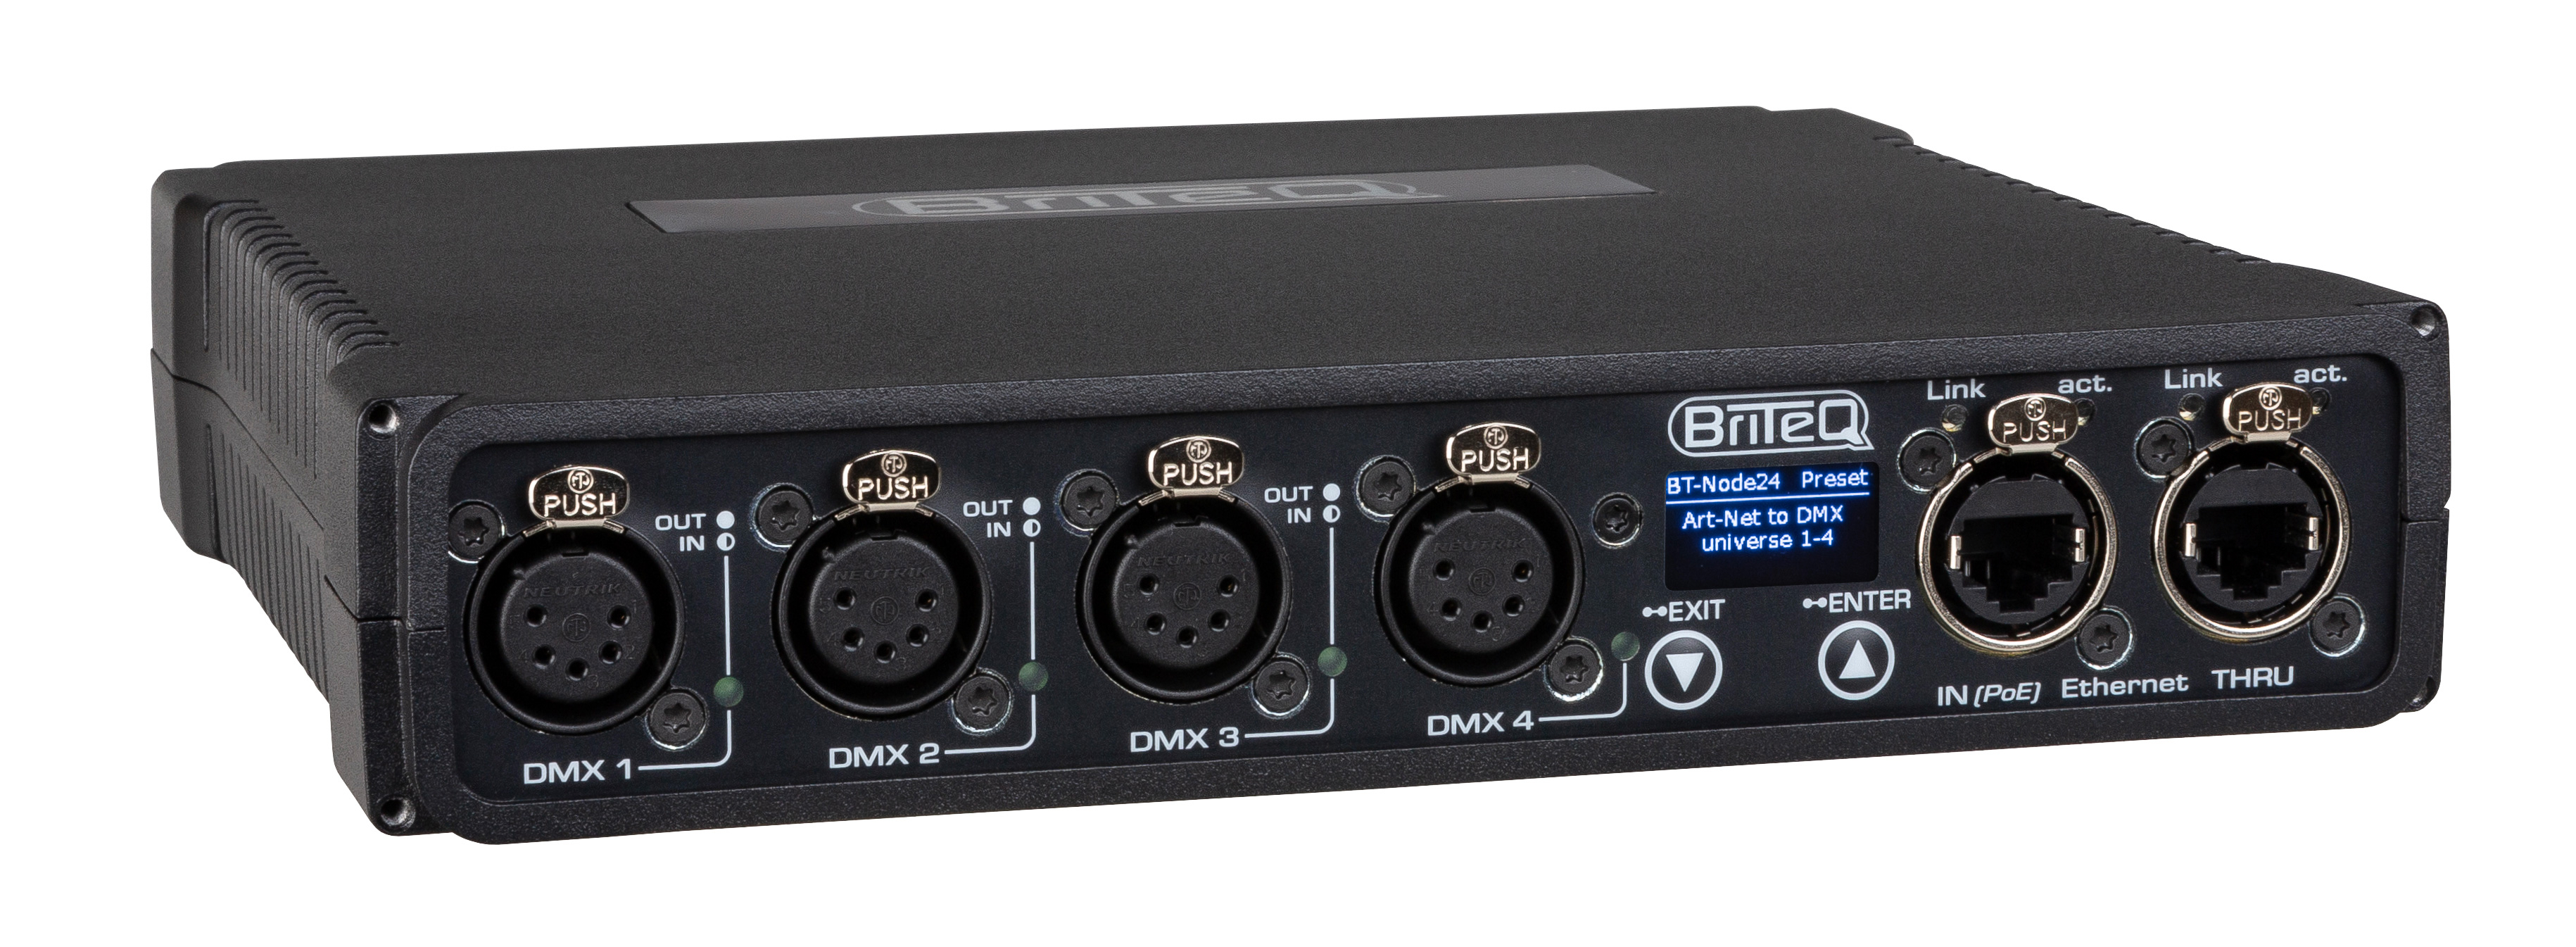 High-speed ArtNet & sACN Node with 4 configurable DMX ports (XLR 5-pin), web interface and OLED display.  Compatible with DHCP, RDM and Gigabit Ethernet with PoE